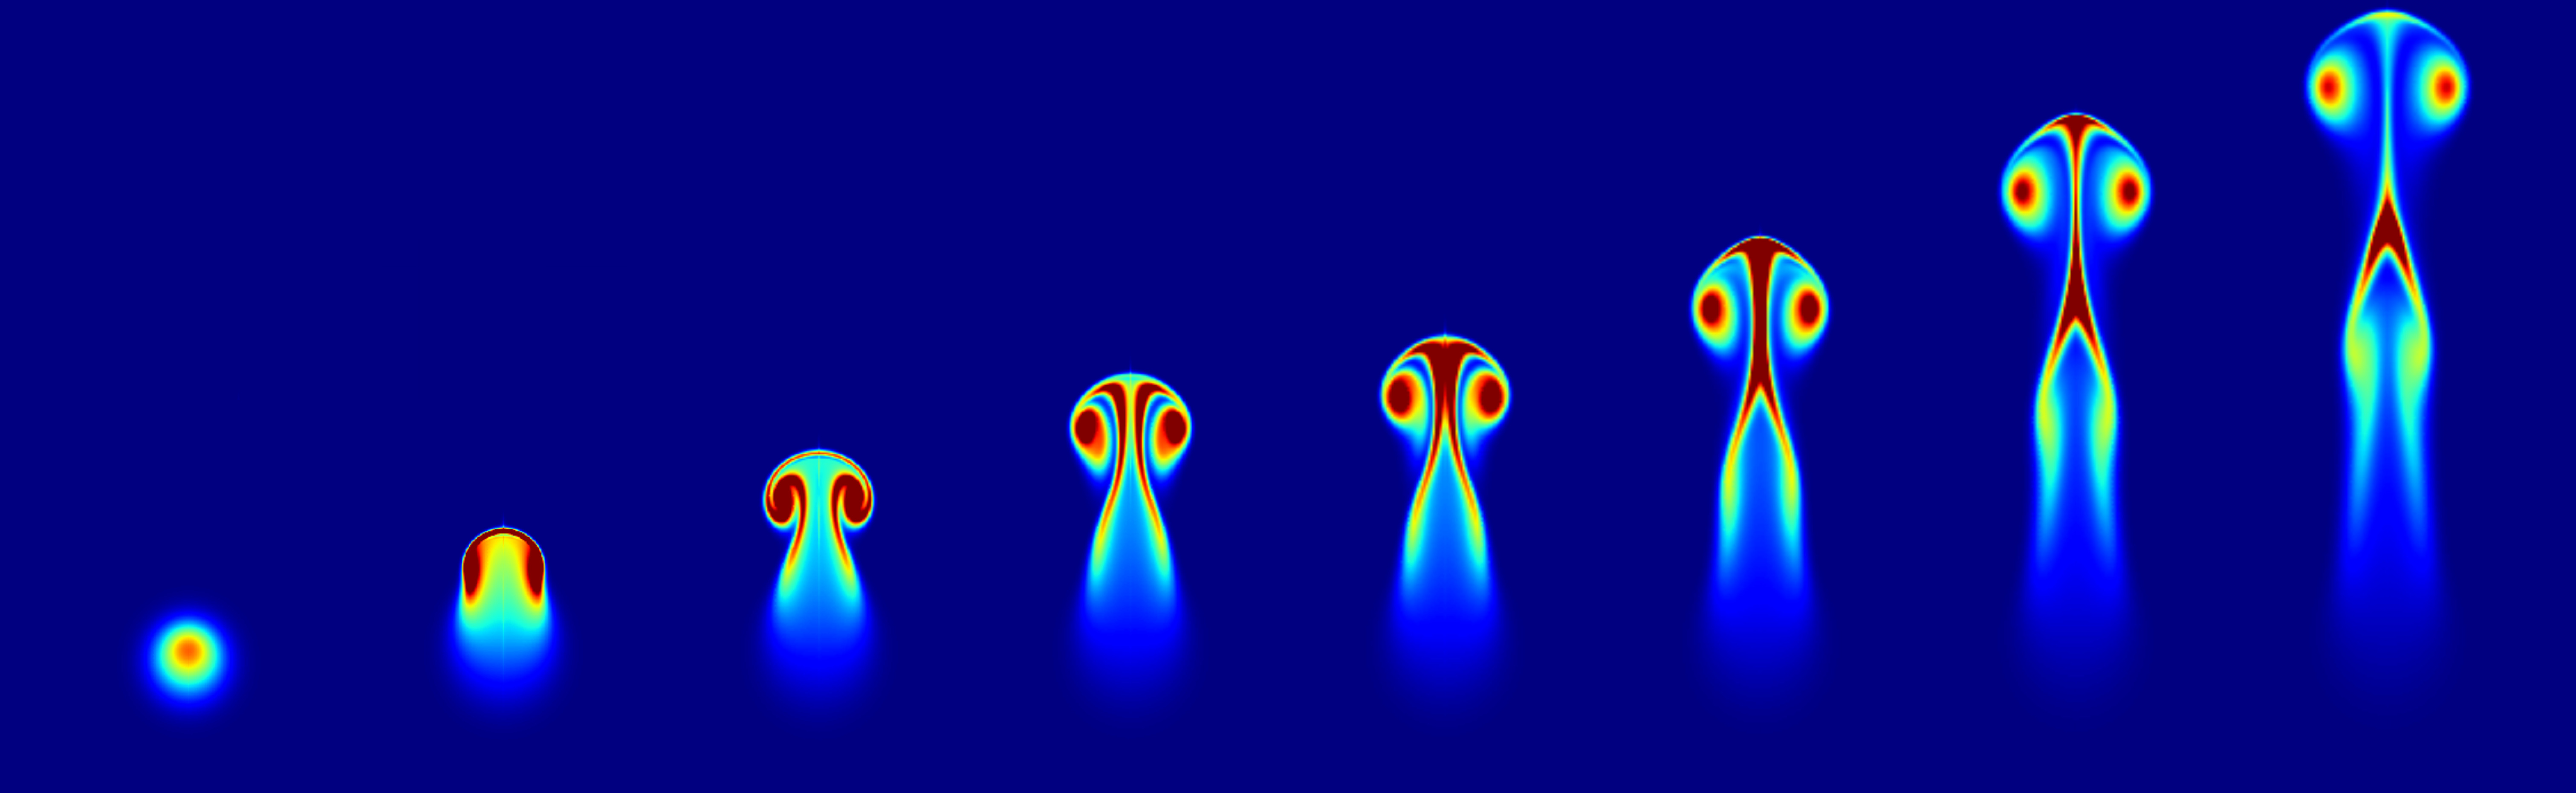 Development of a thermal from blob, to mushroom, to vortex ring.